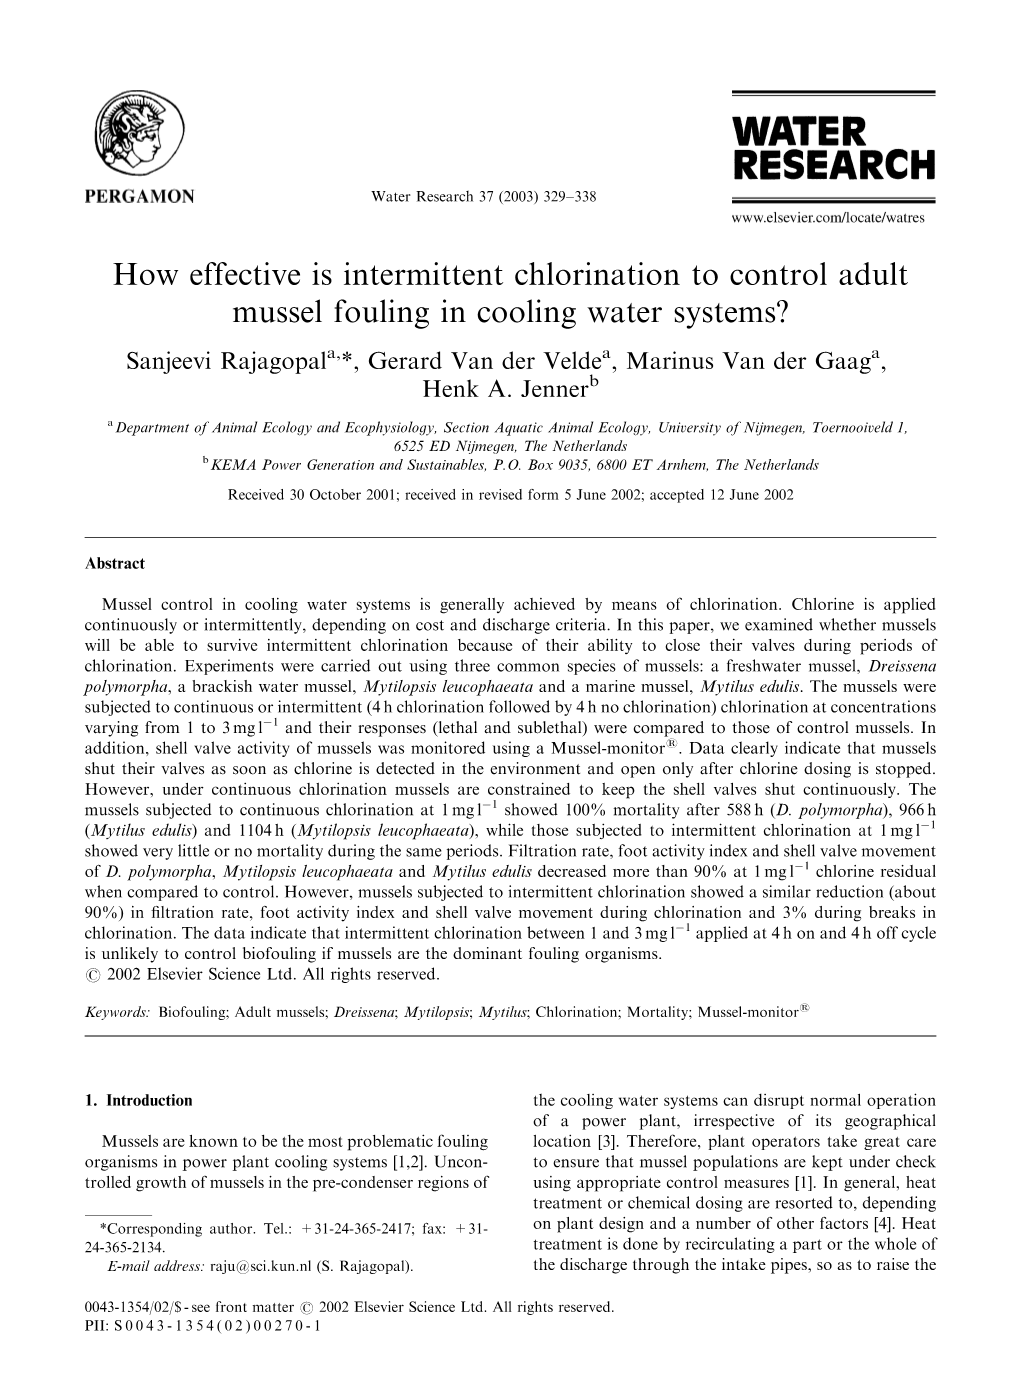 How Effective Is Intermittent Chlorination to Control Adult Mussel